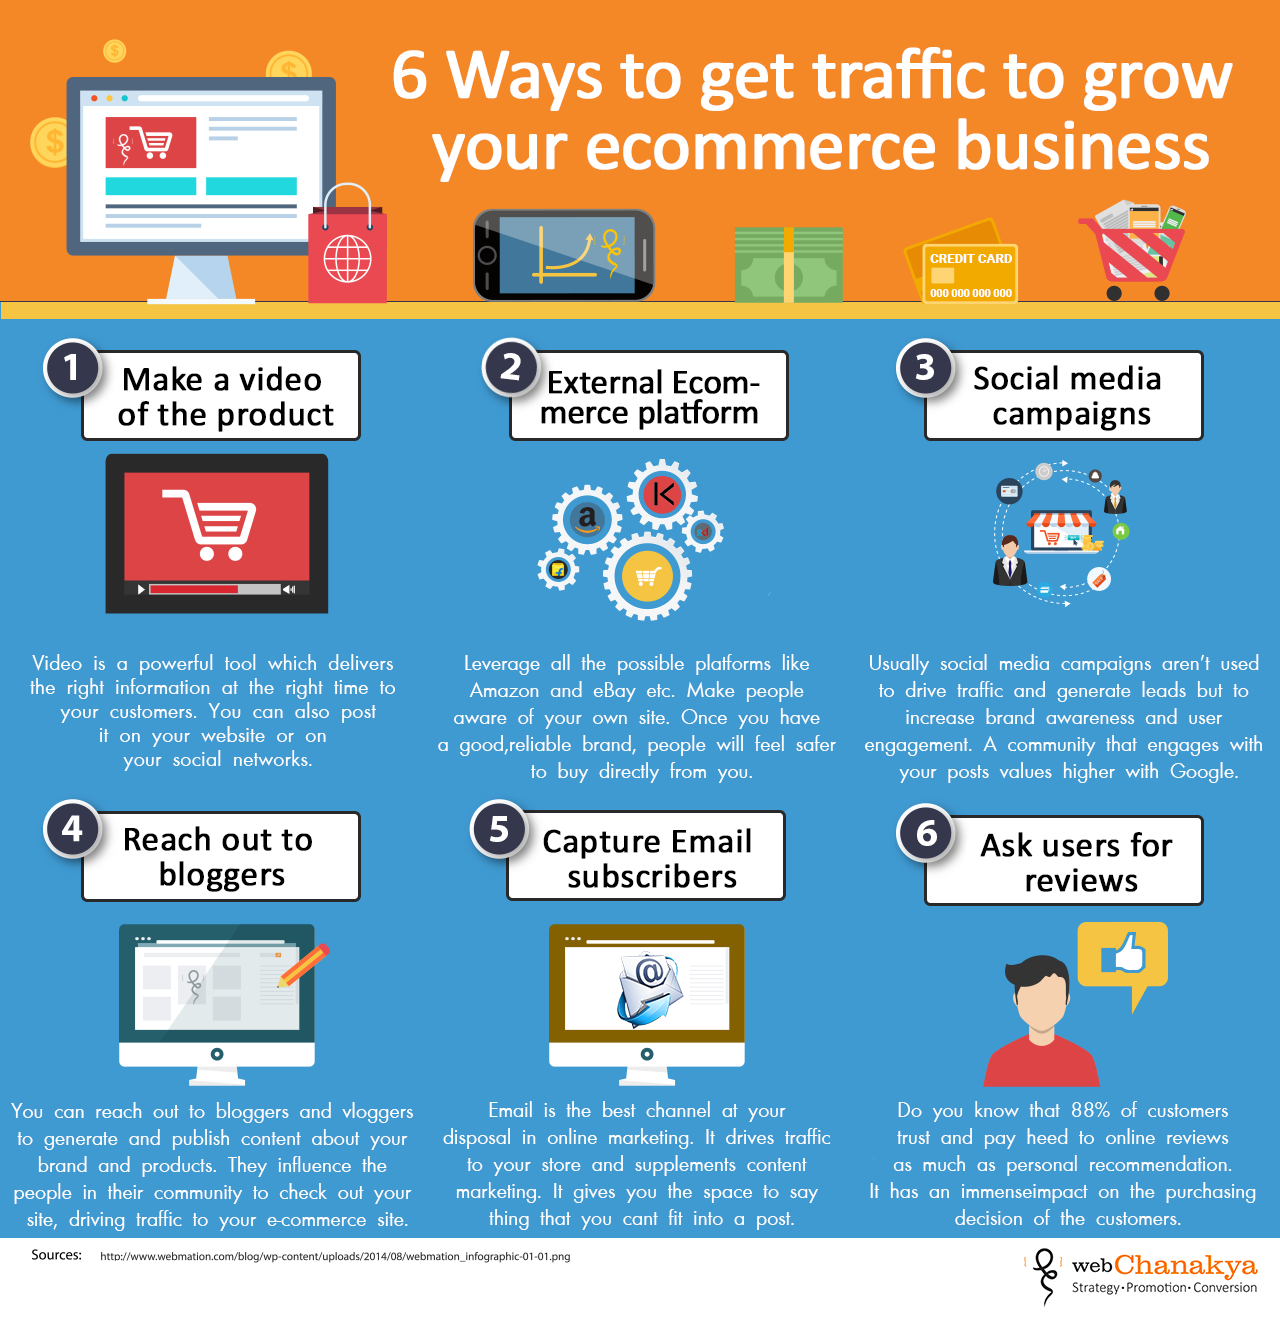 6 Ways to get traffic to grow your eCommerce business